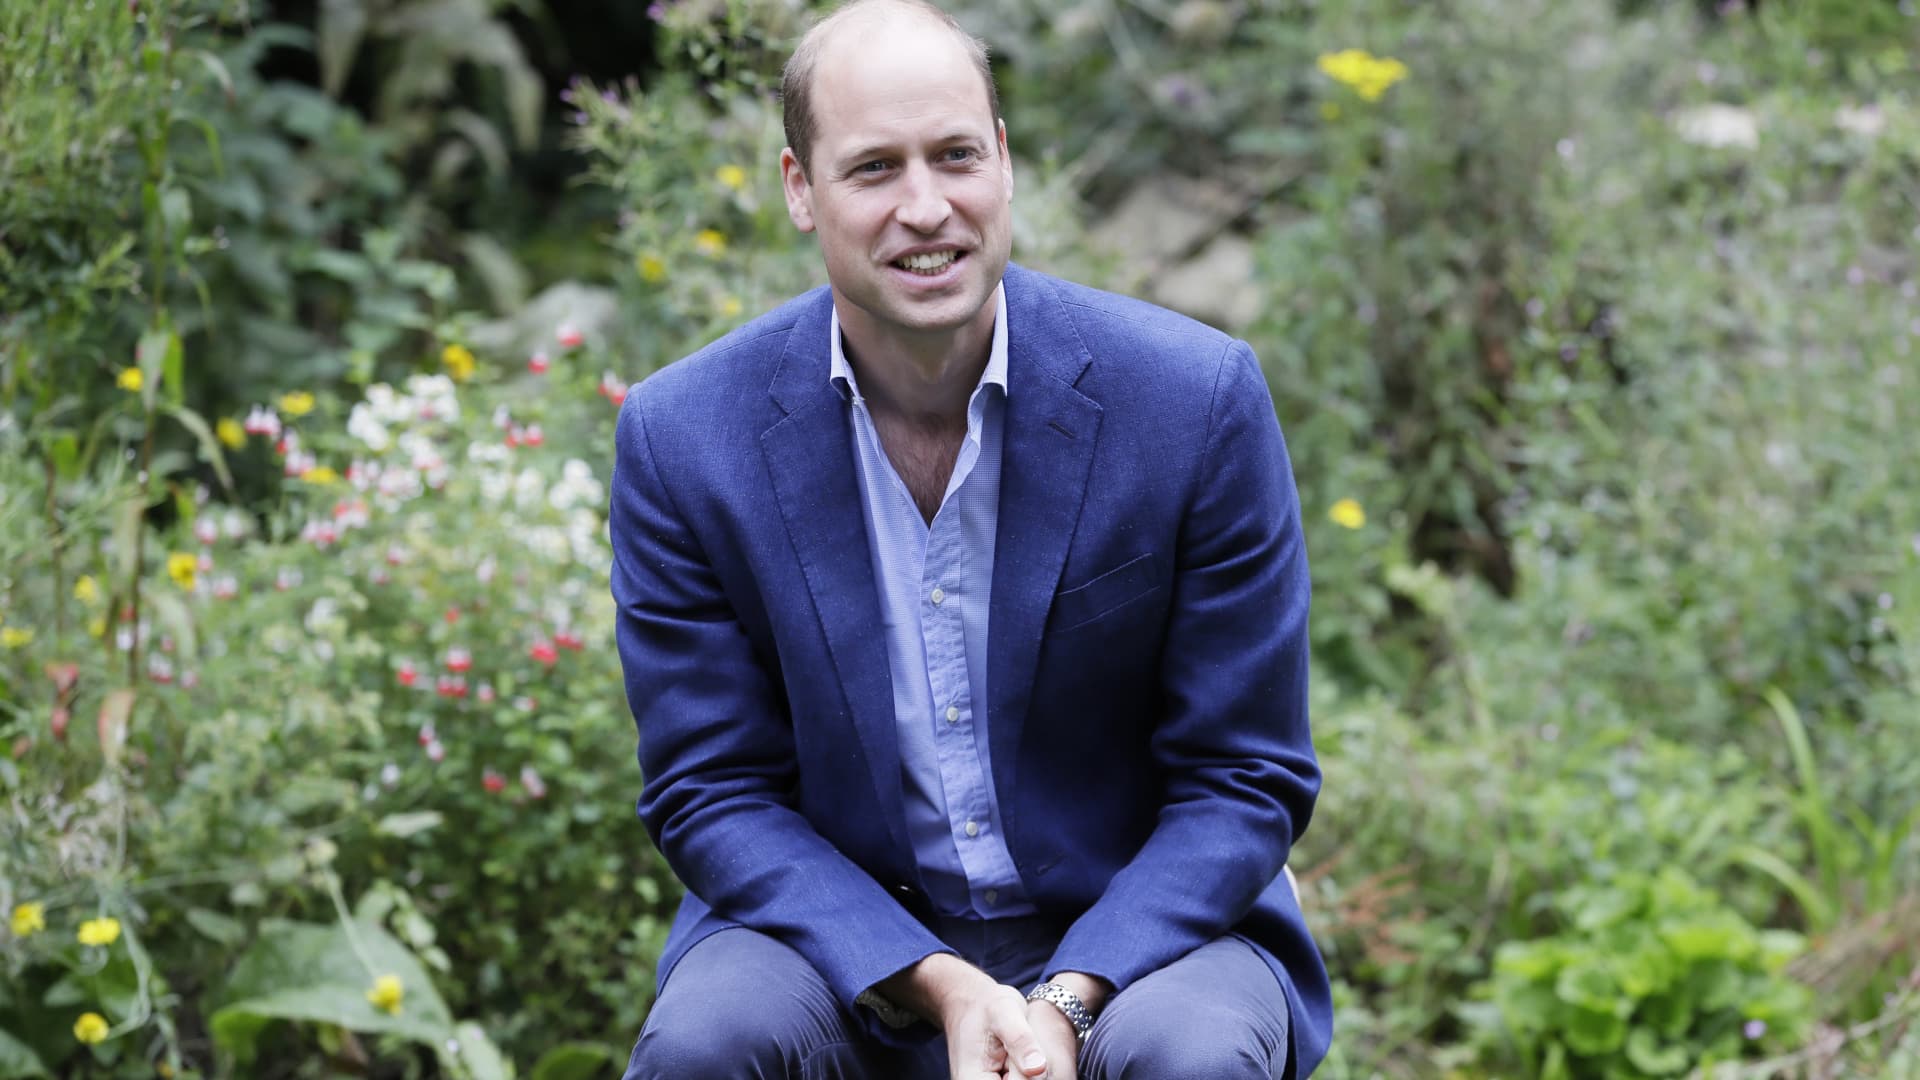 Prince William photographed in Peterborough, England, on July 16, 2020.